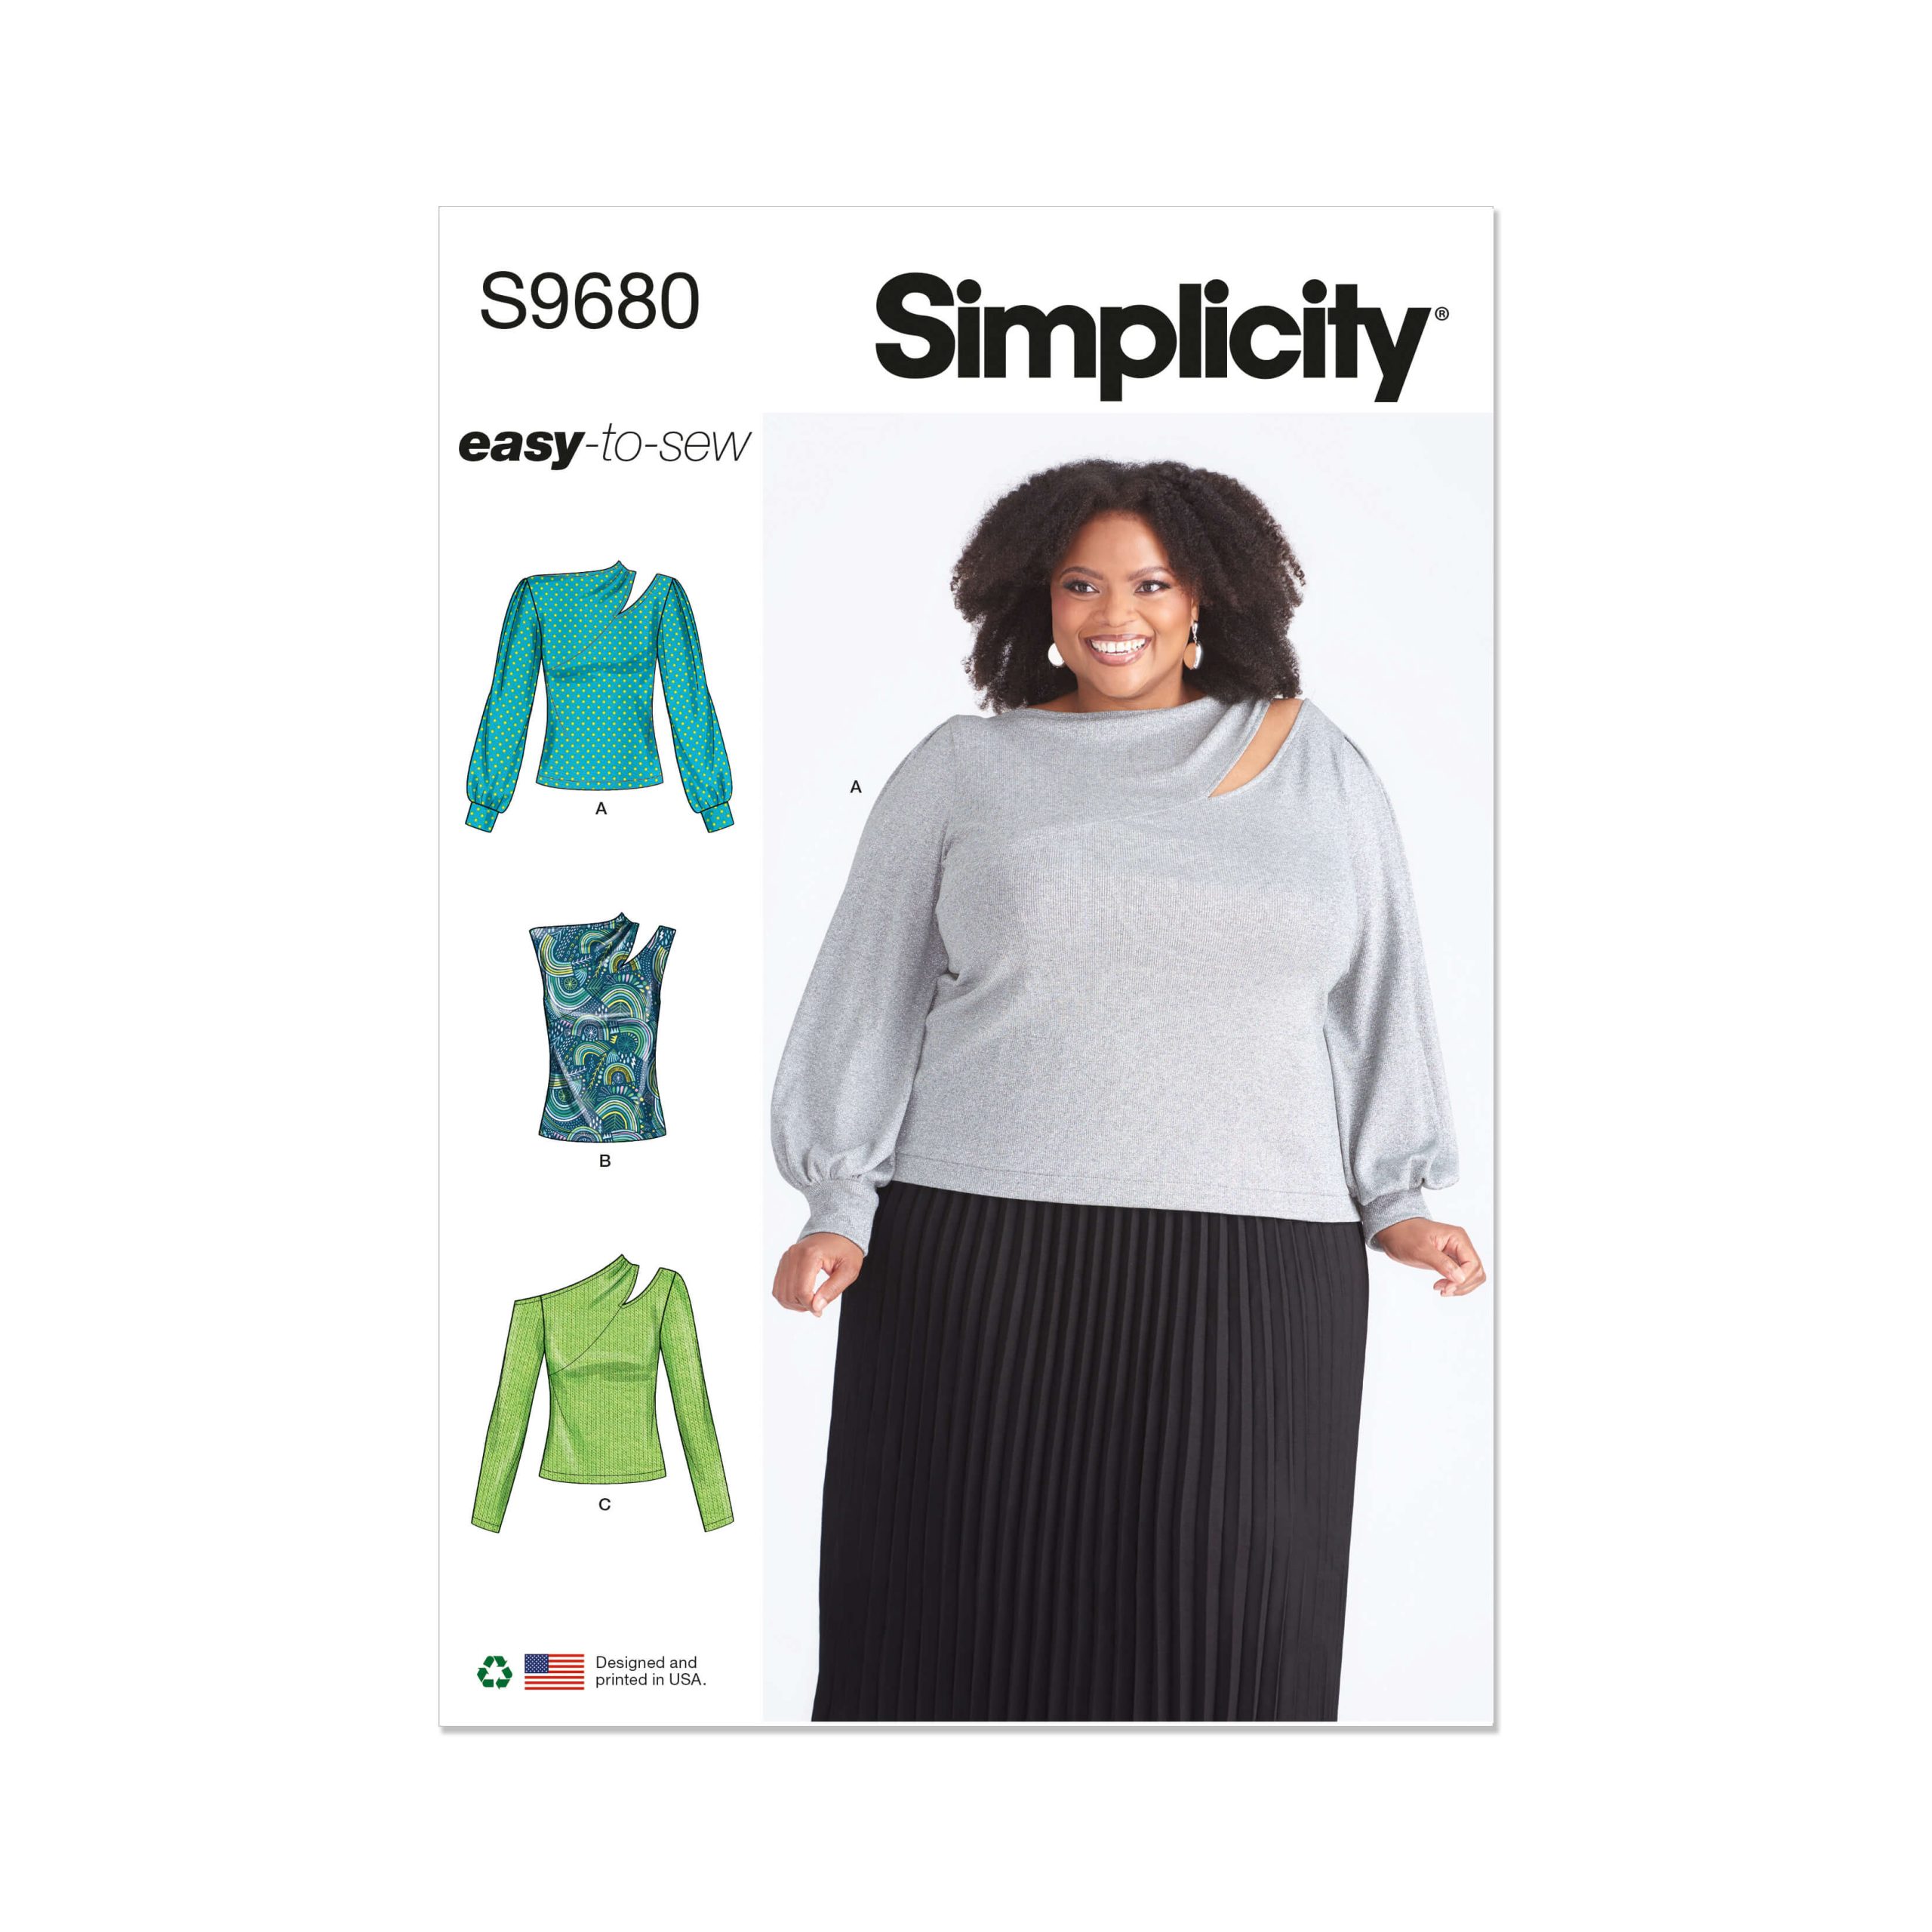 Simplicity Sewing Pattern S9680 Women's Knit Top with Sleeve Variations